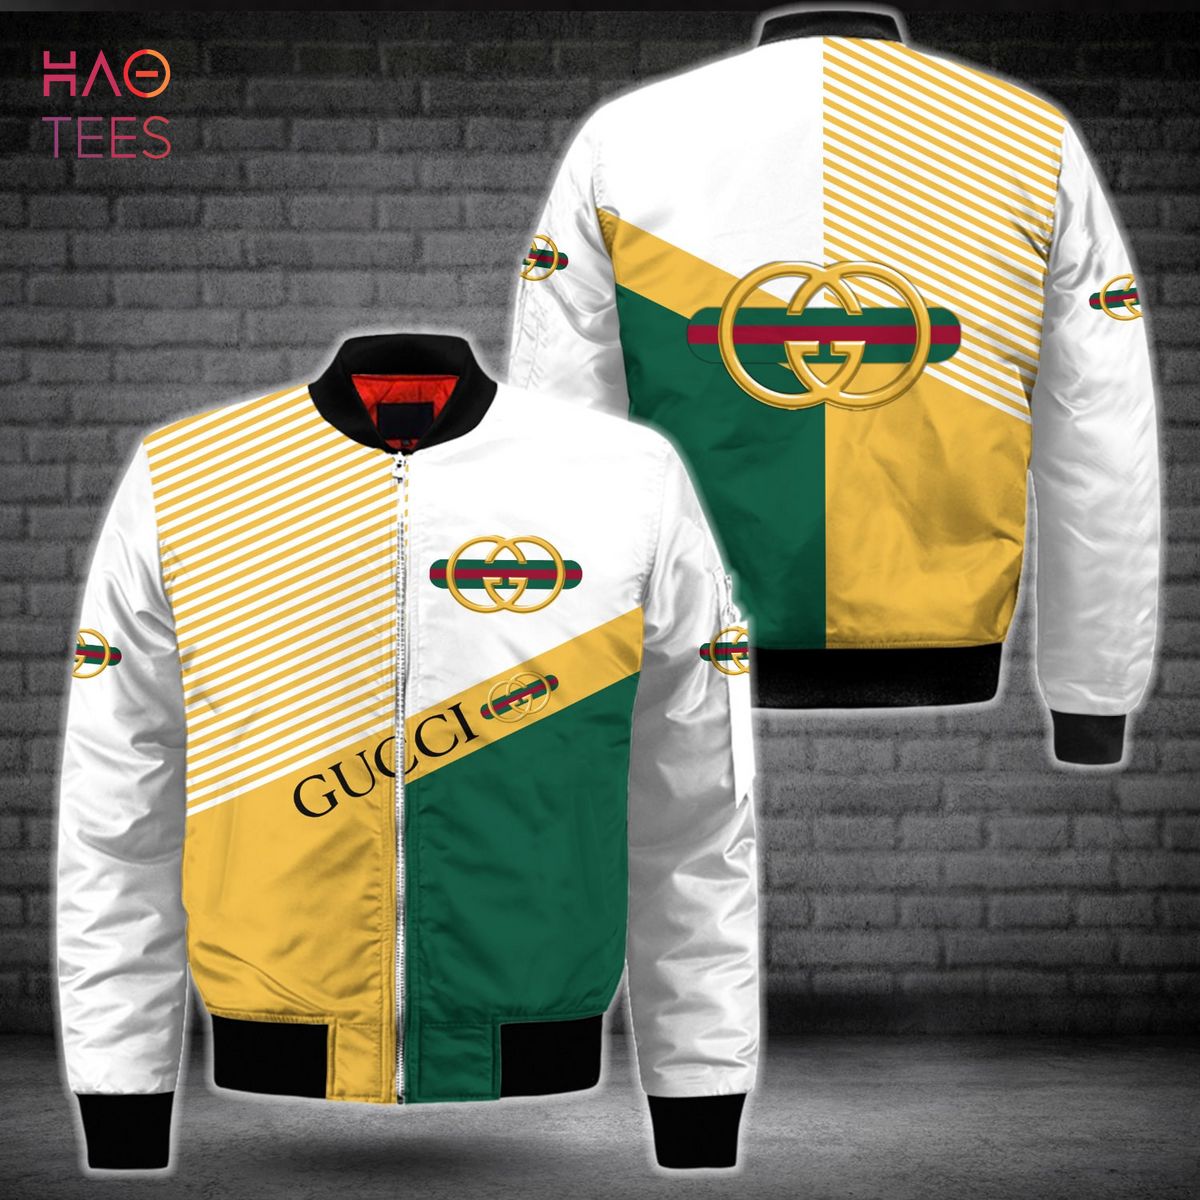 HOT Gucci Luxury Brand Green Gold White Bomber Jacket Limited Edition